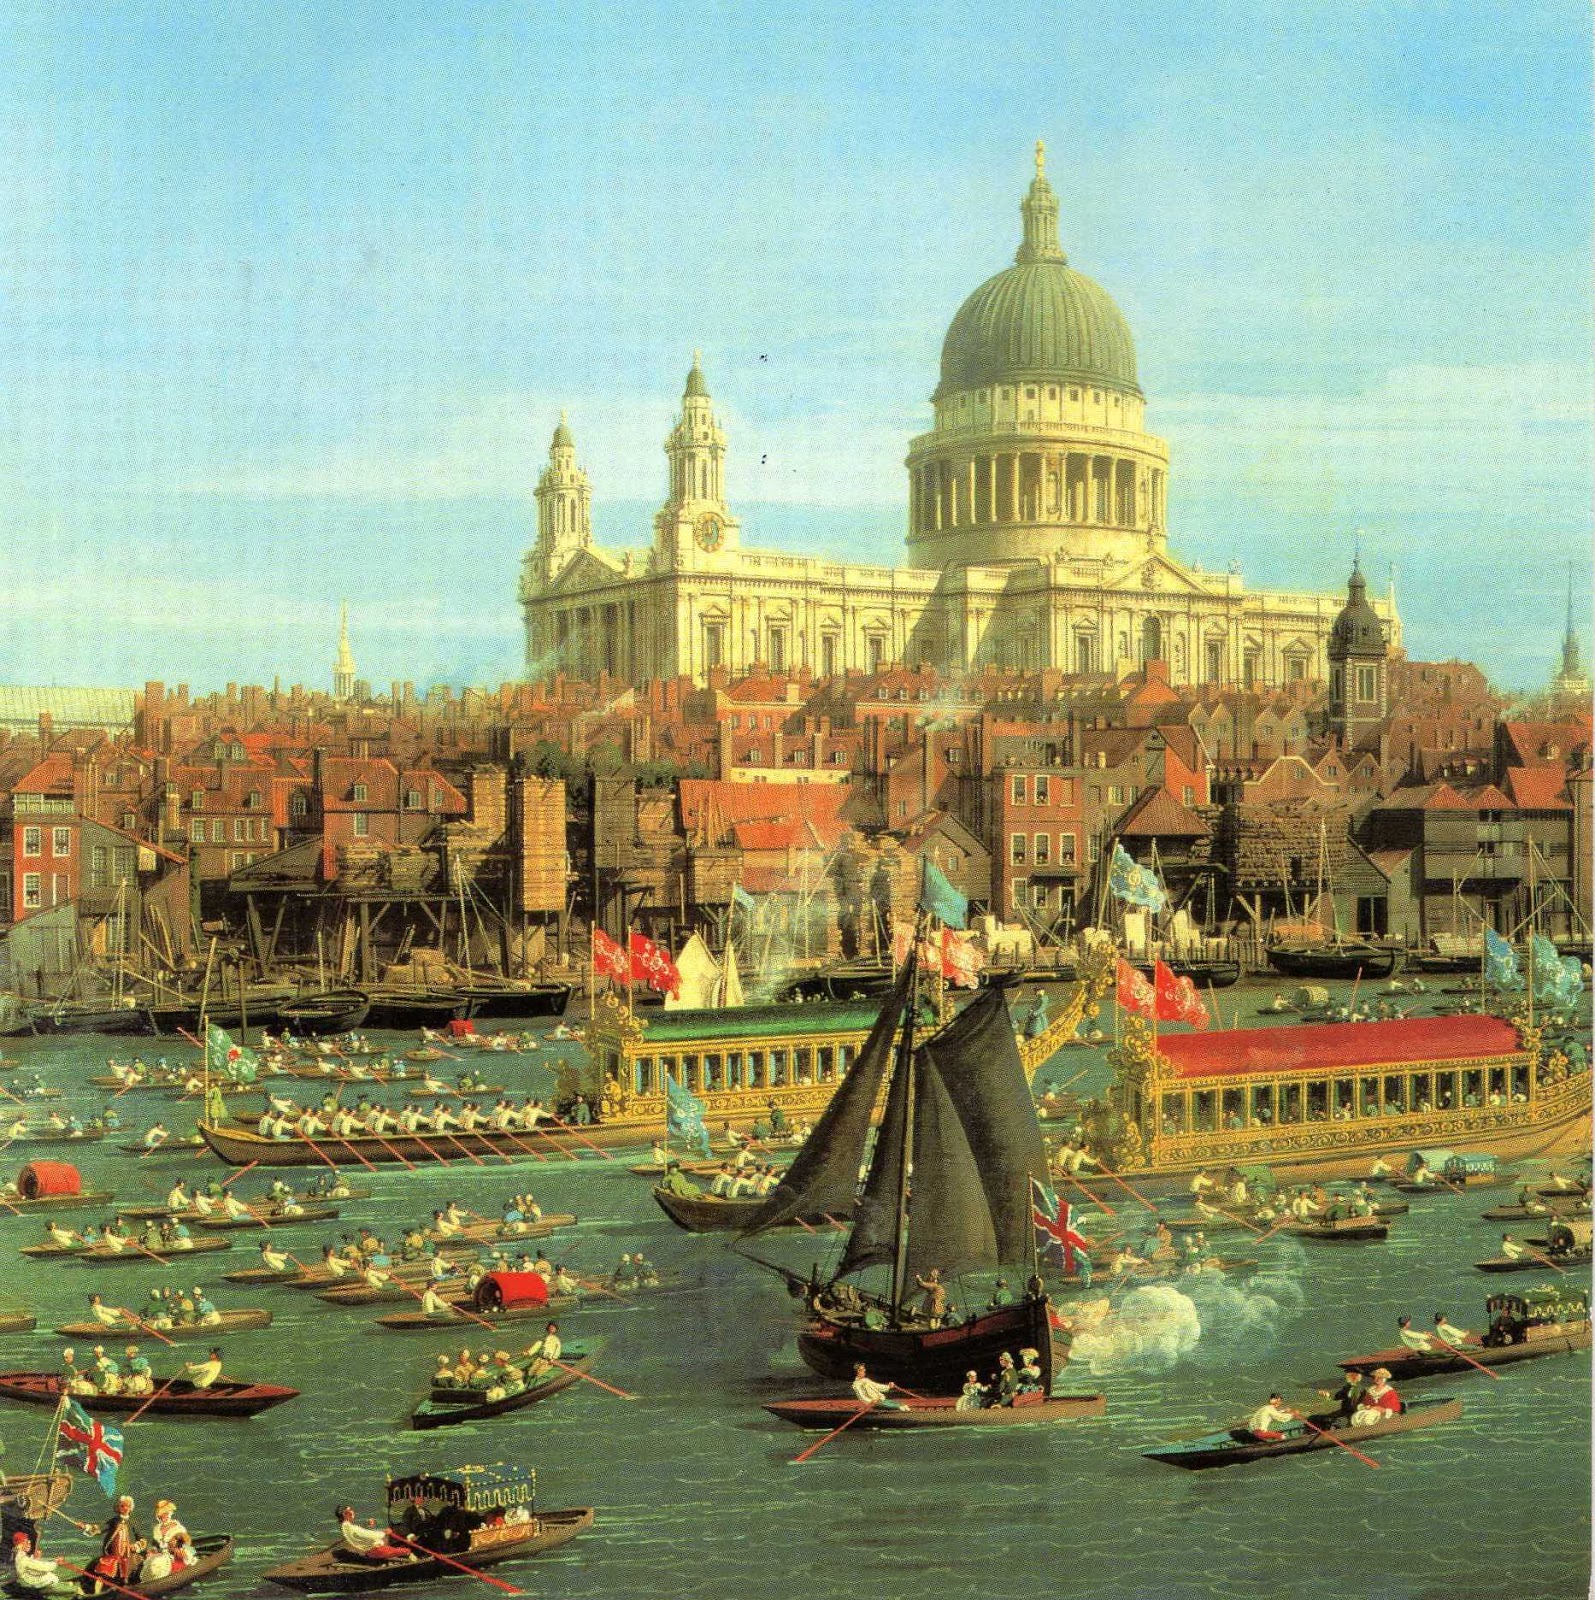 Canaletto-1697-1768 (33).jpg